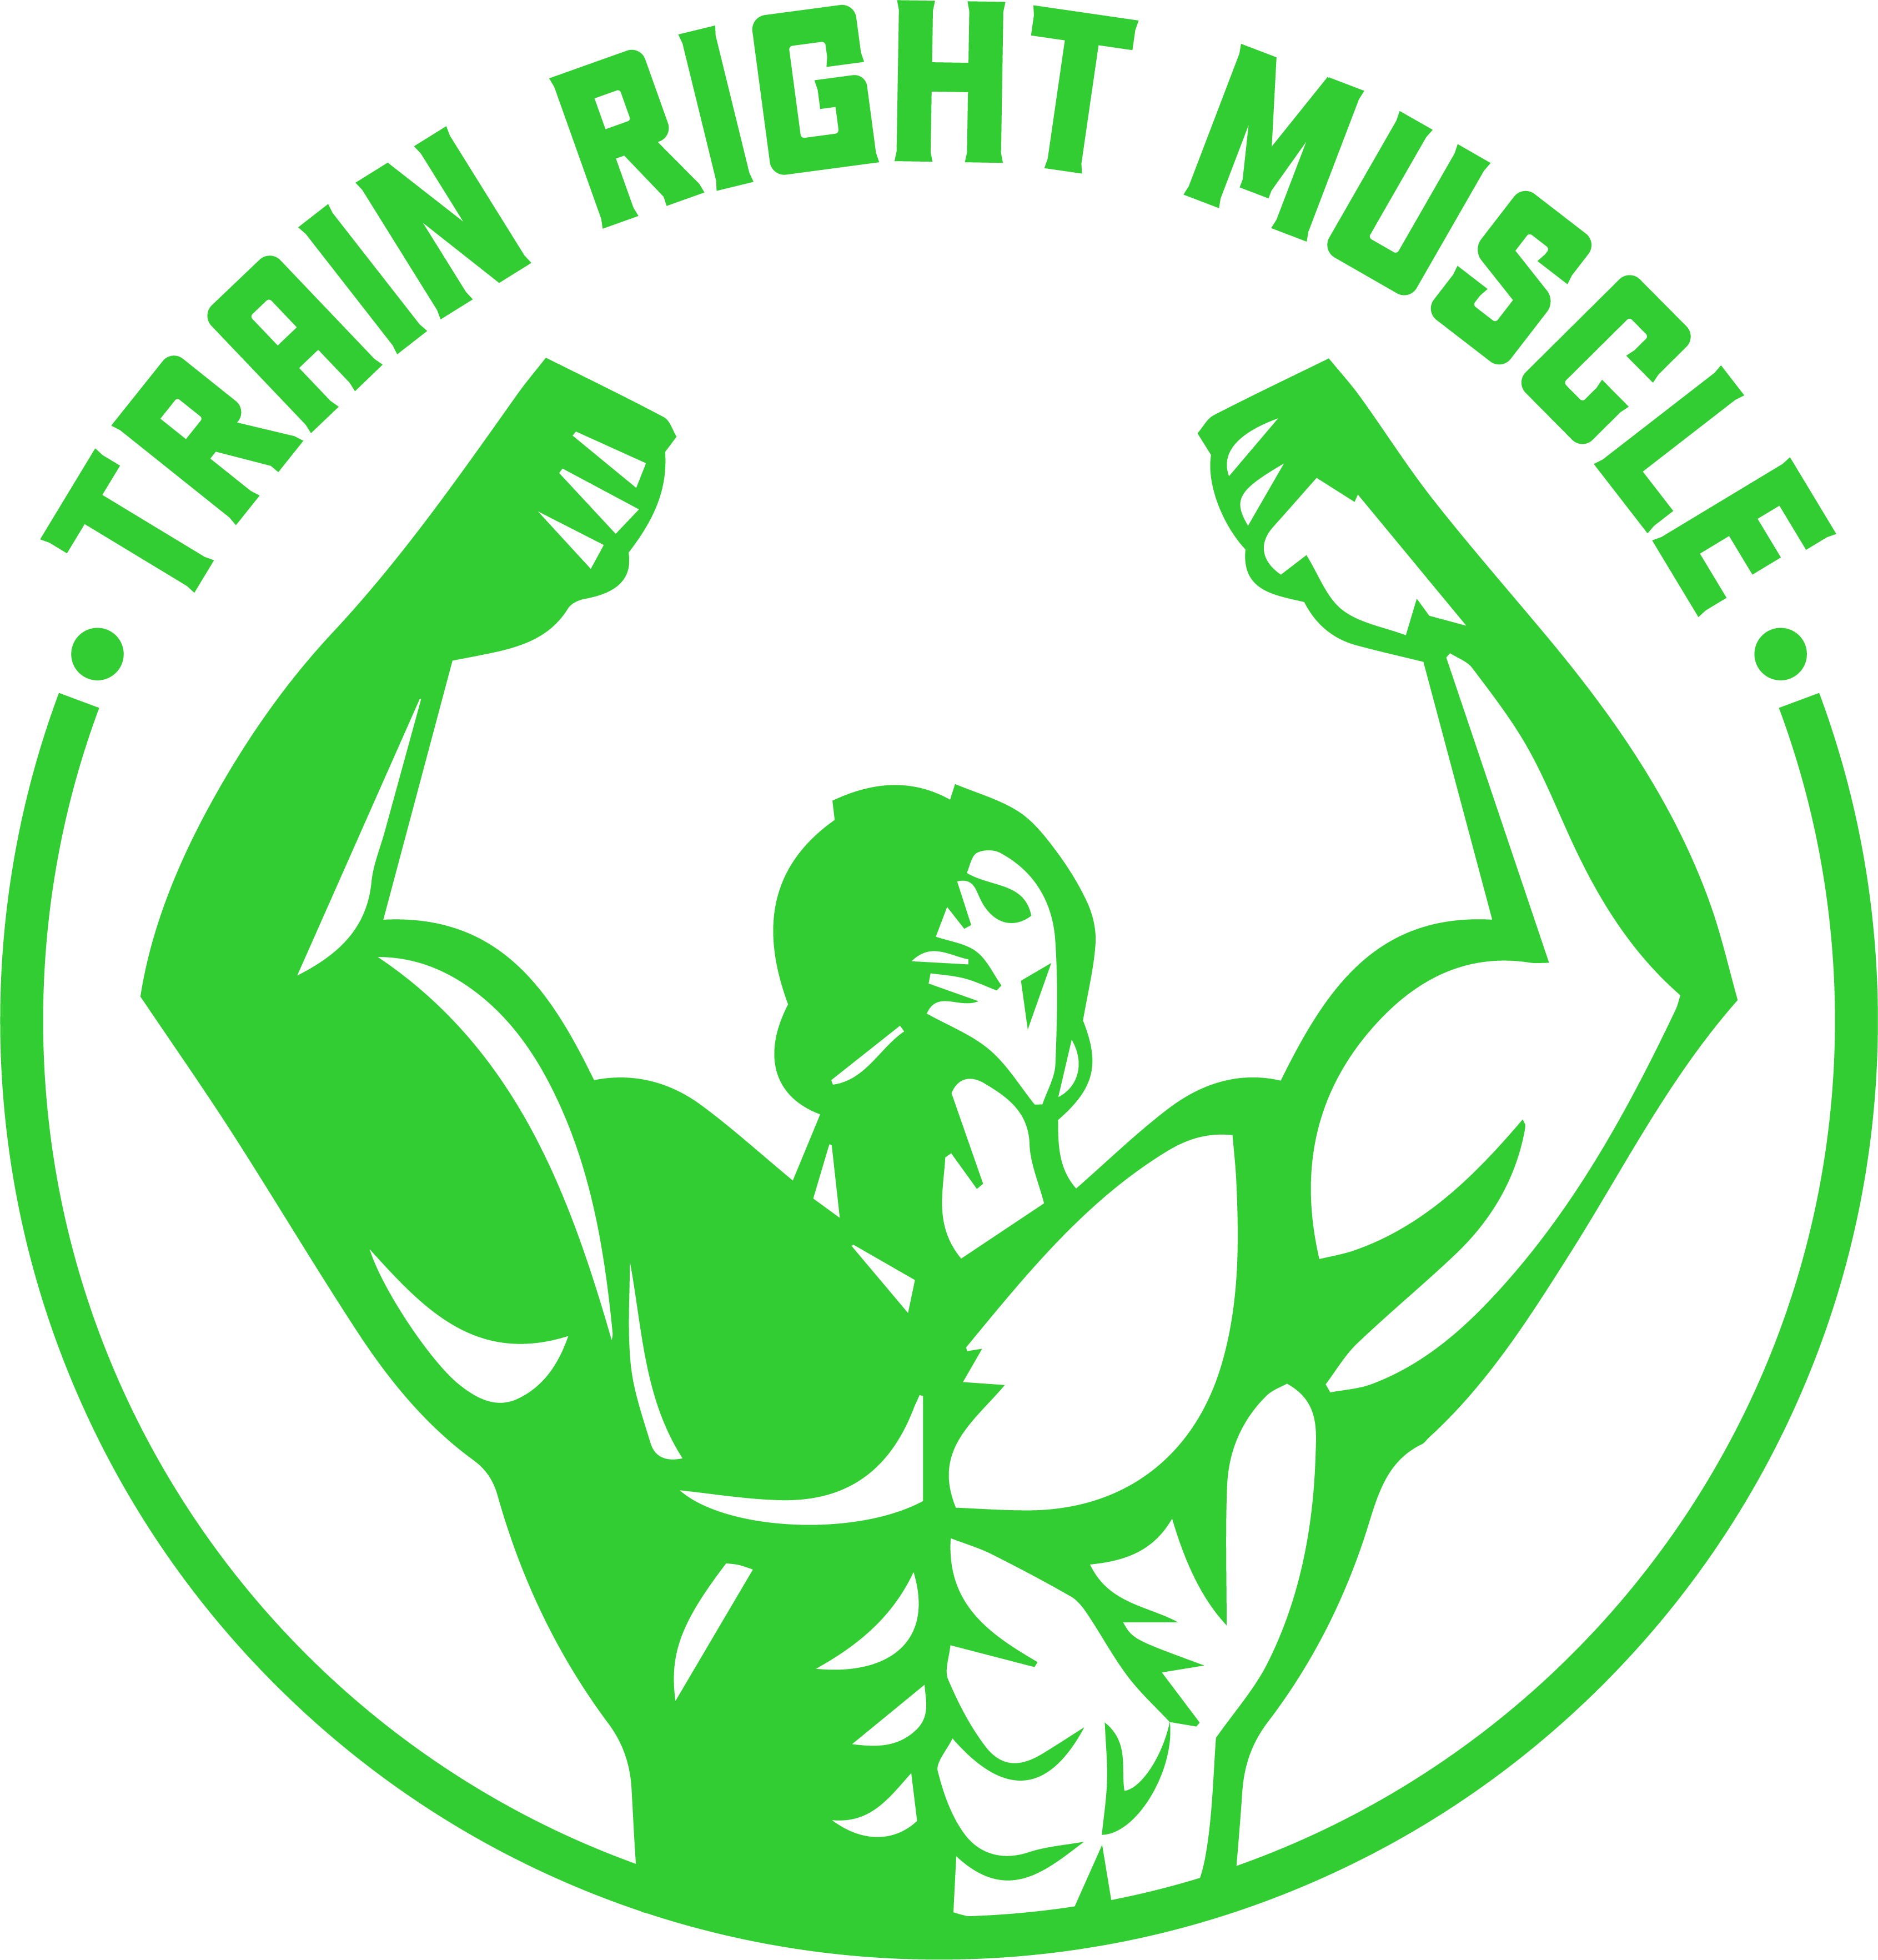 Trainrightmuscle